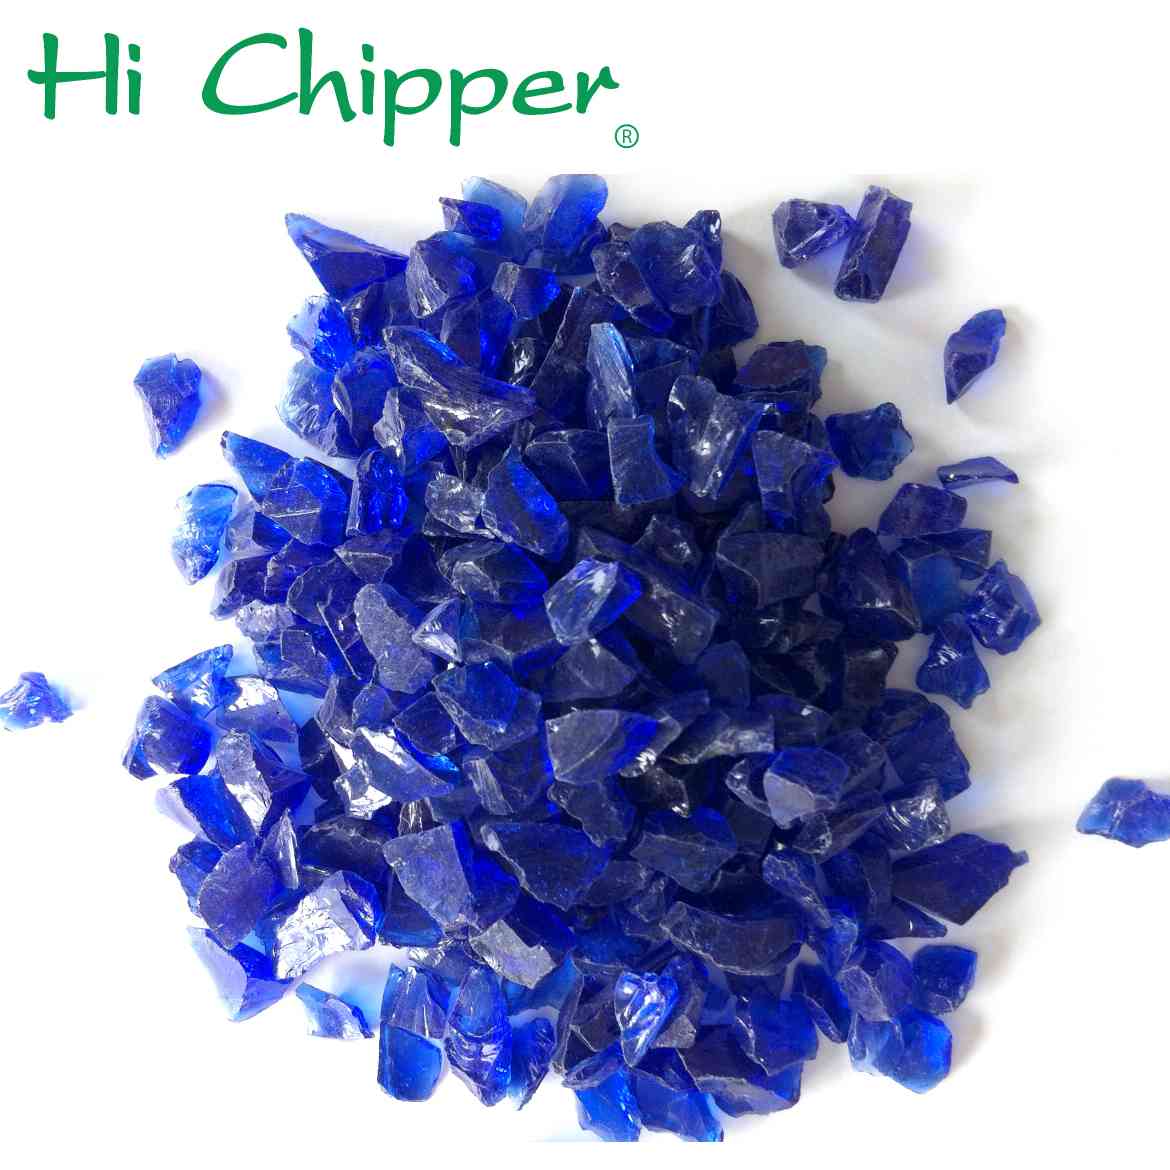 Decorative Crushed Colored Glass Chips for Terrazzo Crafts